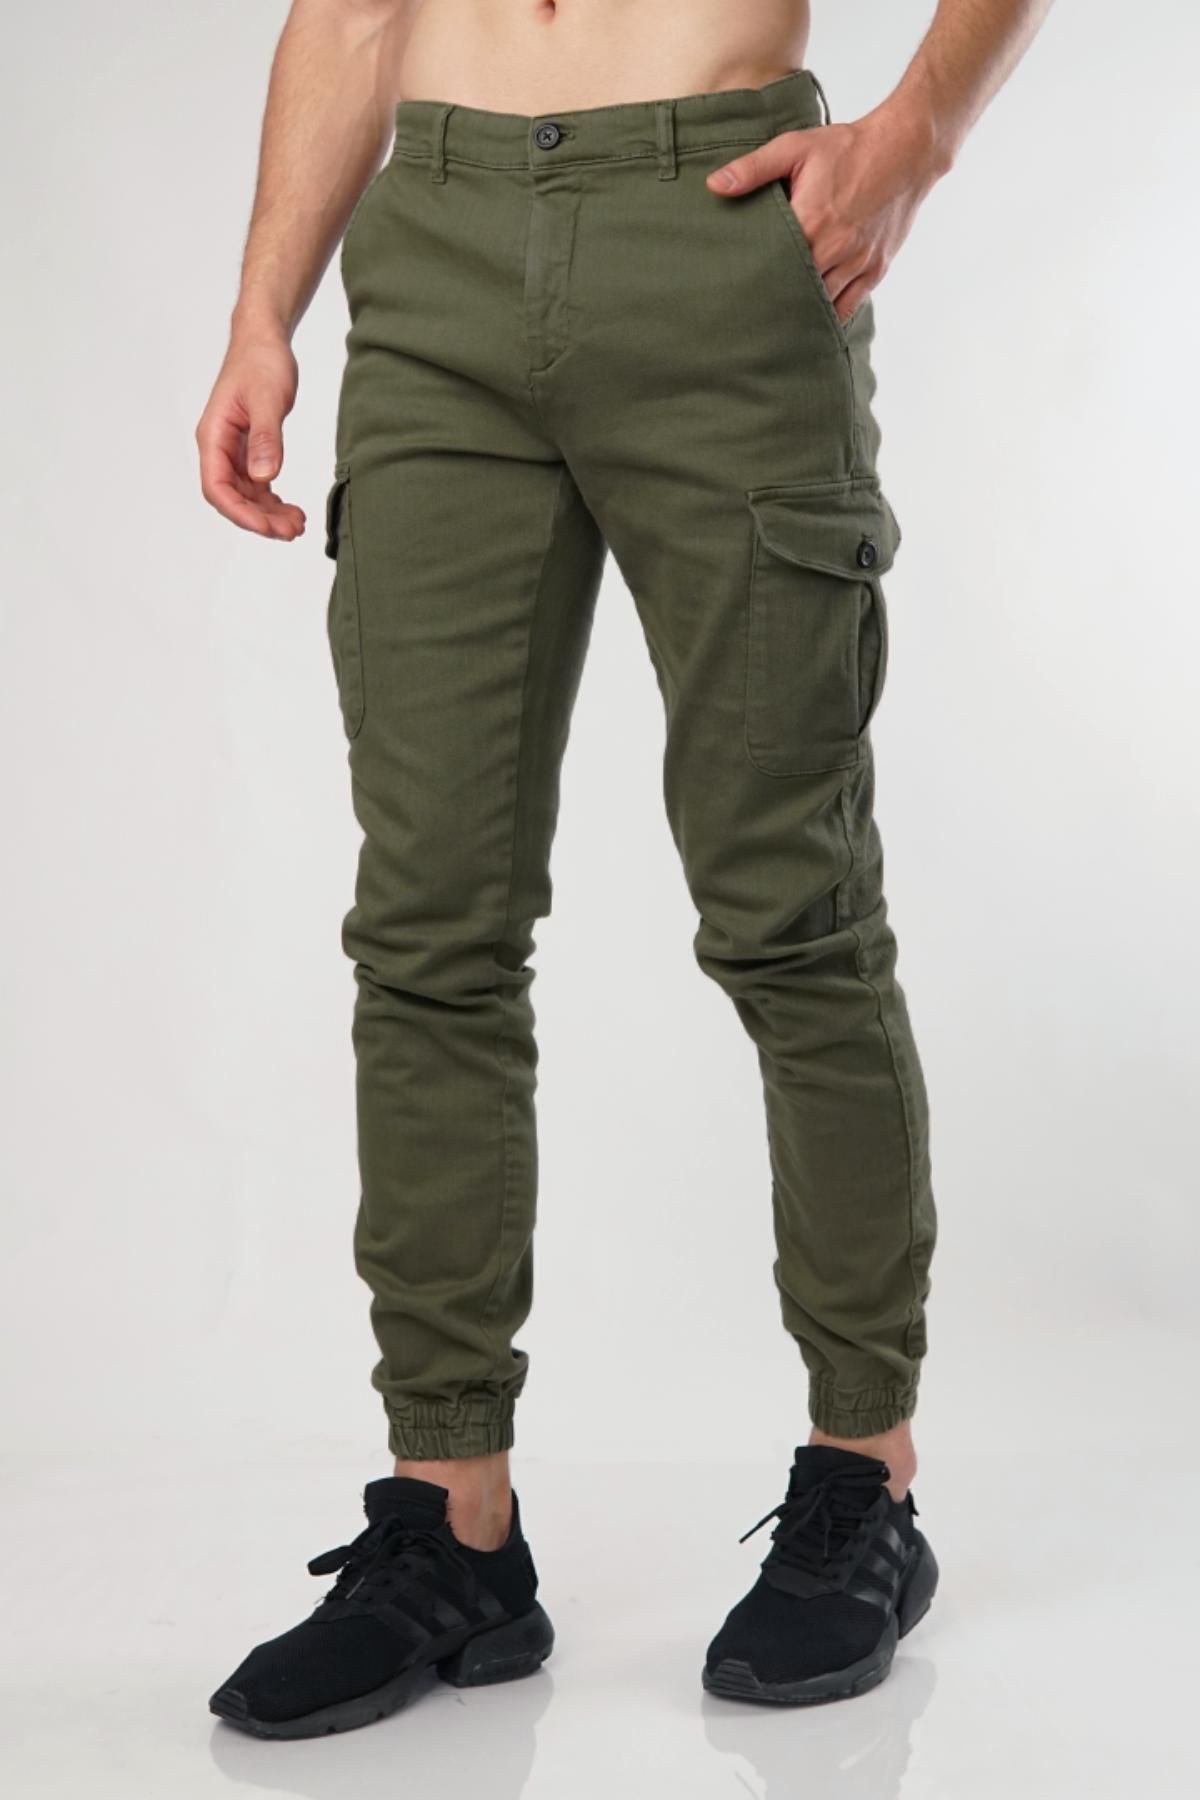 Clearance-sale Cargo Pants for Men Men Solid Patchwork Casual Multiple  Pockets Outdoor Straight Type Fitness Pants Cargo Pants Trousers Outdoors  ,Army Green,M - Walmart.com